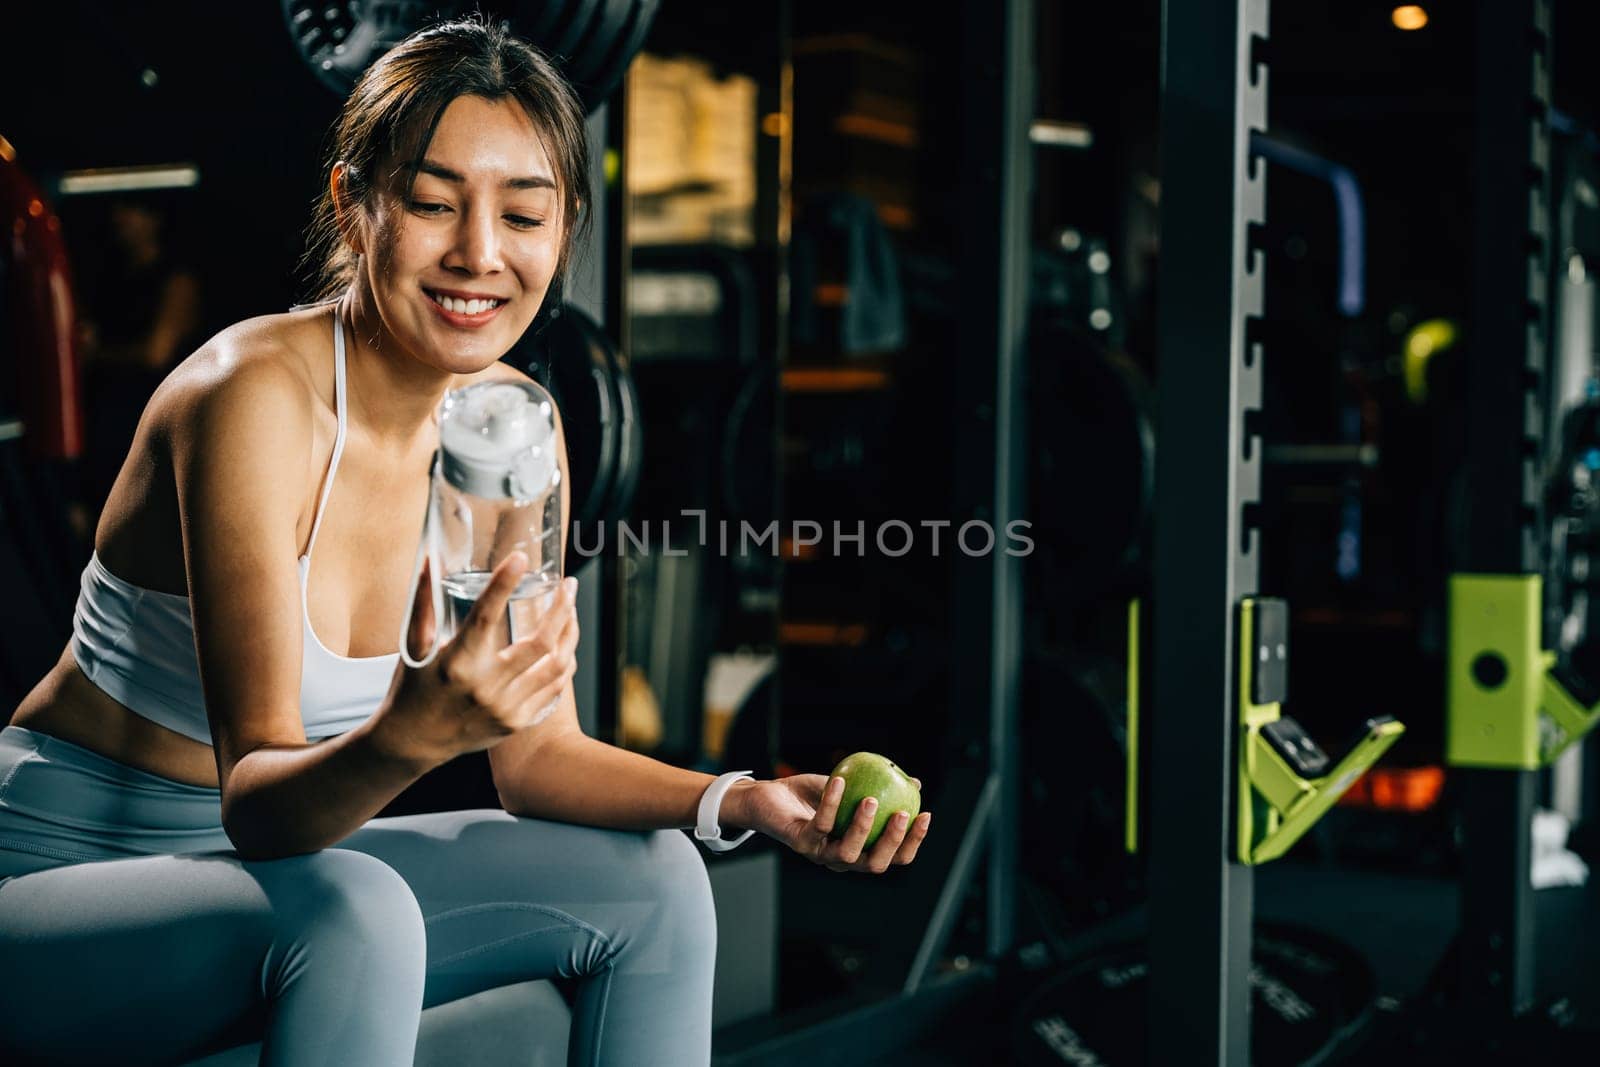 Asian girl holds green apple and water bottle in a gym, reminding viewers of the importance of balanced diet and hydration for achieving healthy lifestyle. Healthy fitness and eating lifestyle concept